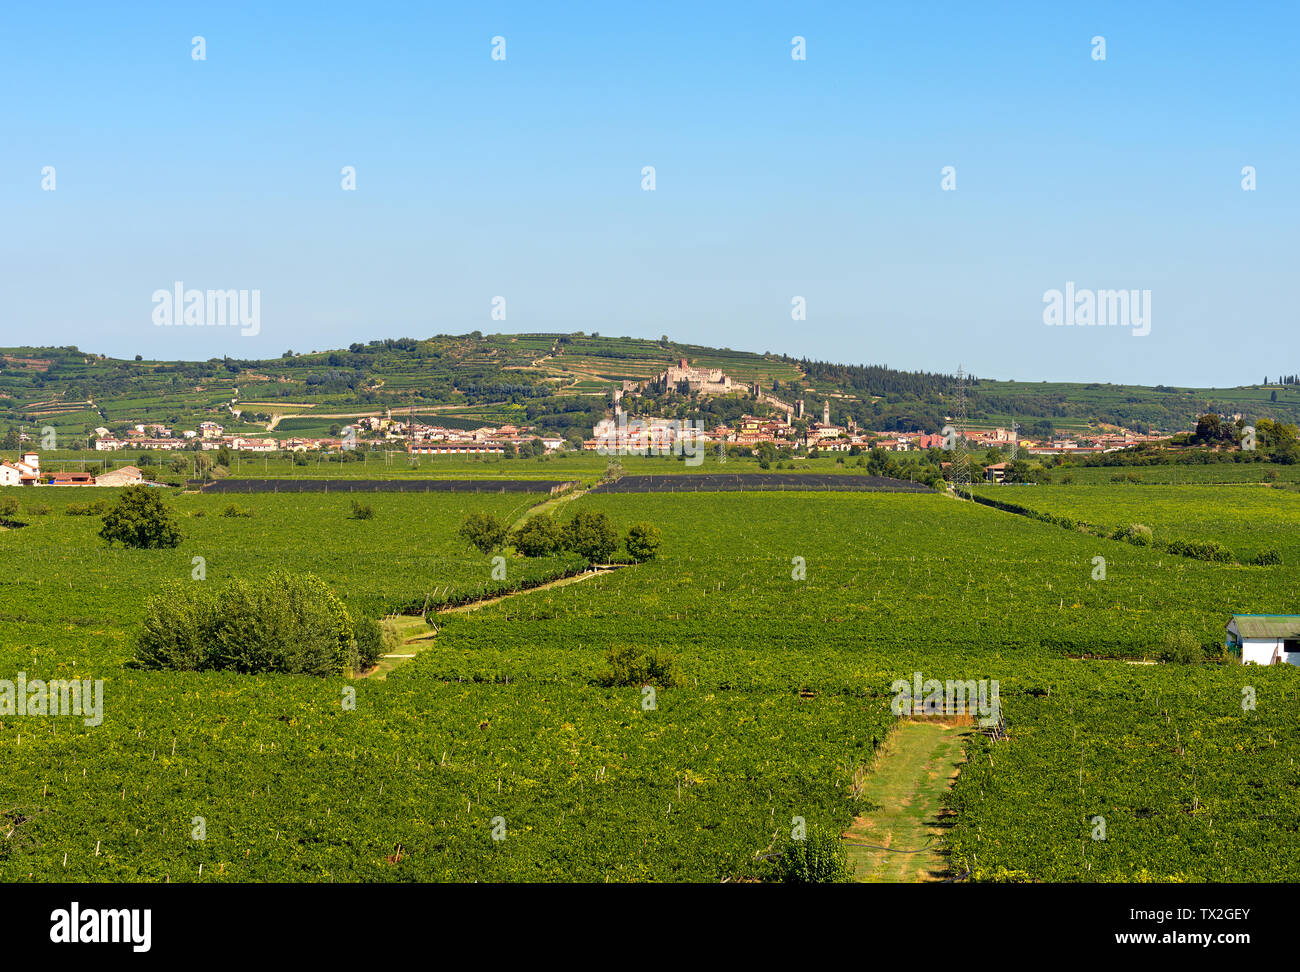 The medieval village of Soave near Verona with the castle, the green hills and the famous vine cultivation, Veneto, Italy, Europe Stock Photo